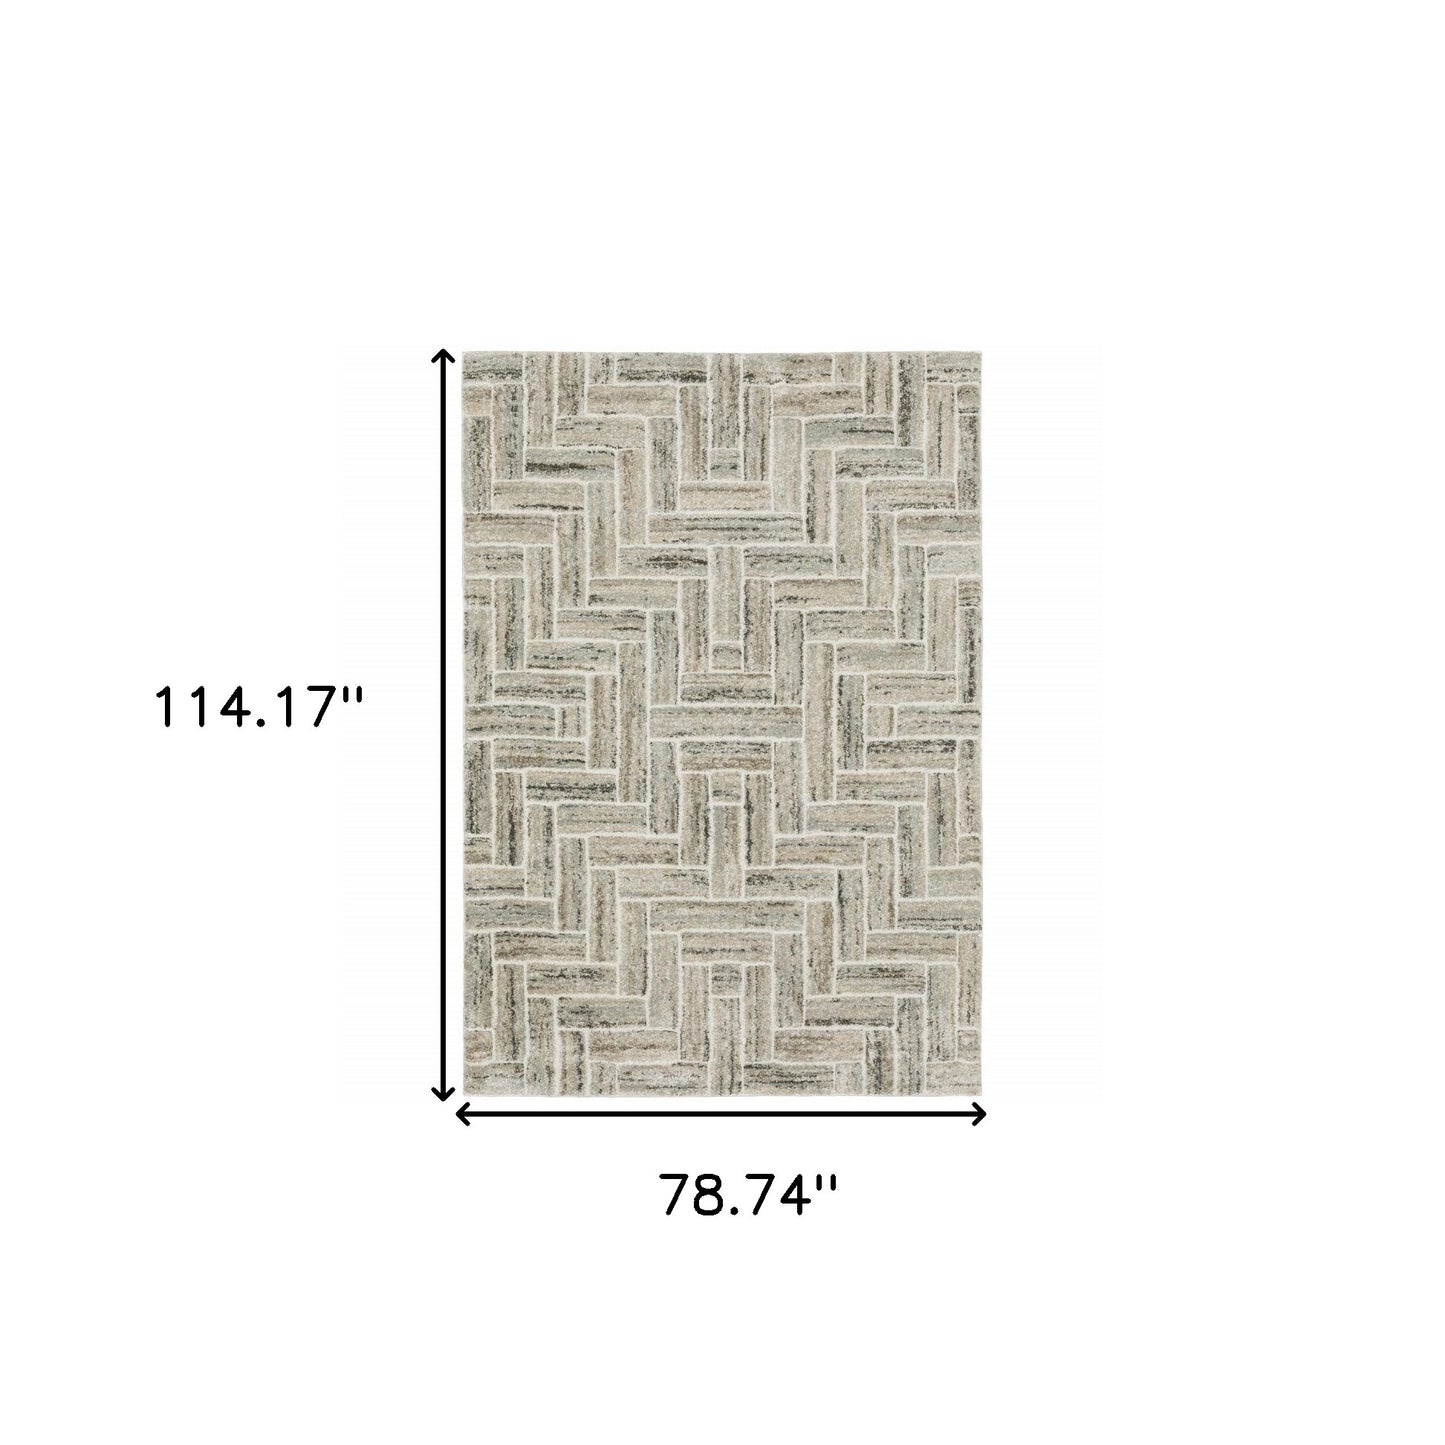 6' X 9' Ivory Beige Grey Brown Pale Blue And Charcoal Geometric Power Loom Stain Resistant Area Rug